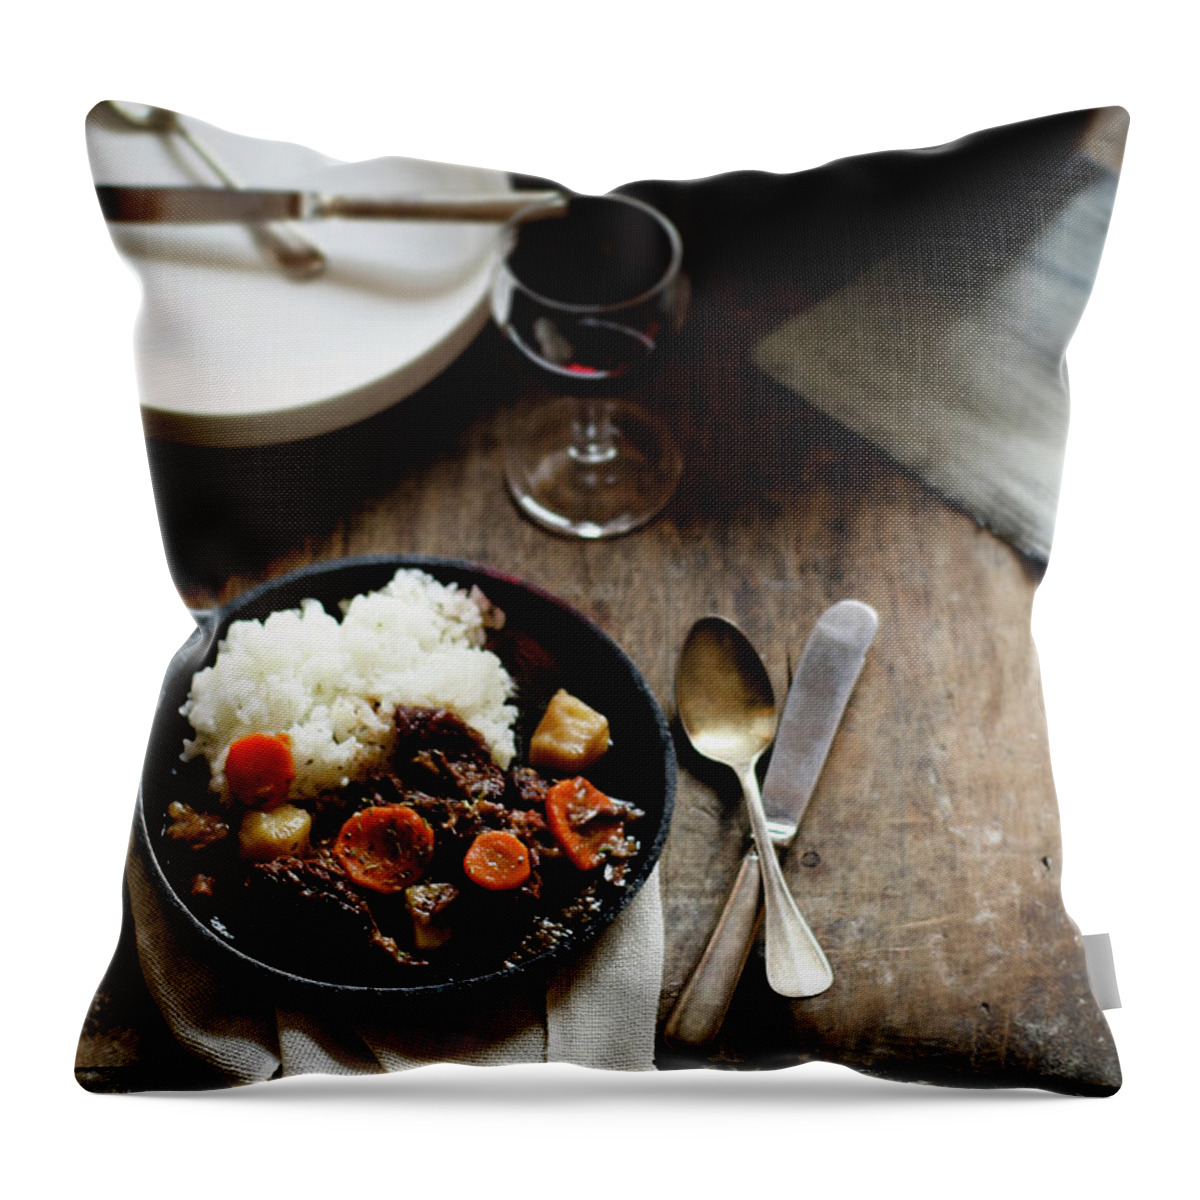 Spoon Throw Pillow featuring the photograph Red Wine Braised Beef by 200